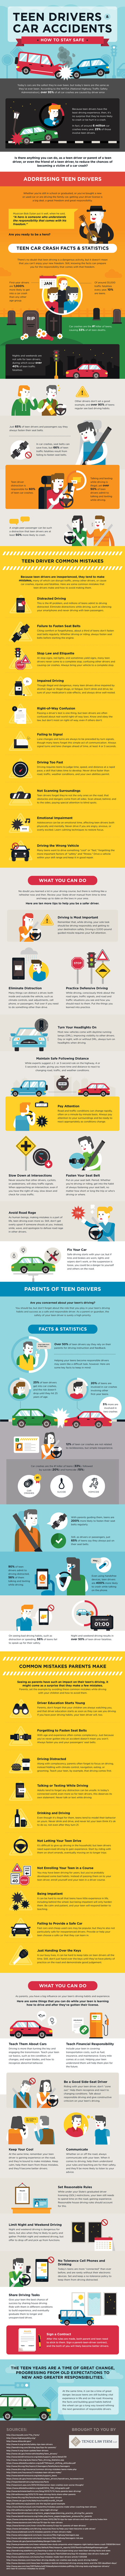 INFOGRAPHIC-Teen-Driving-Accidents